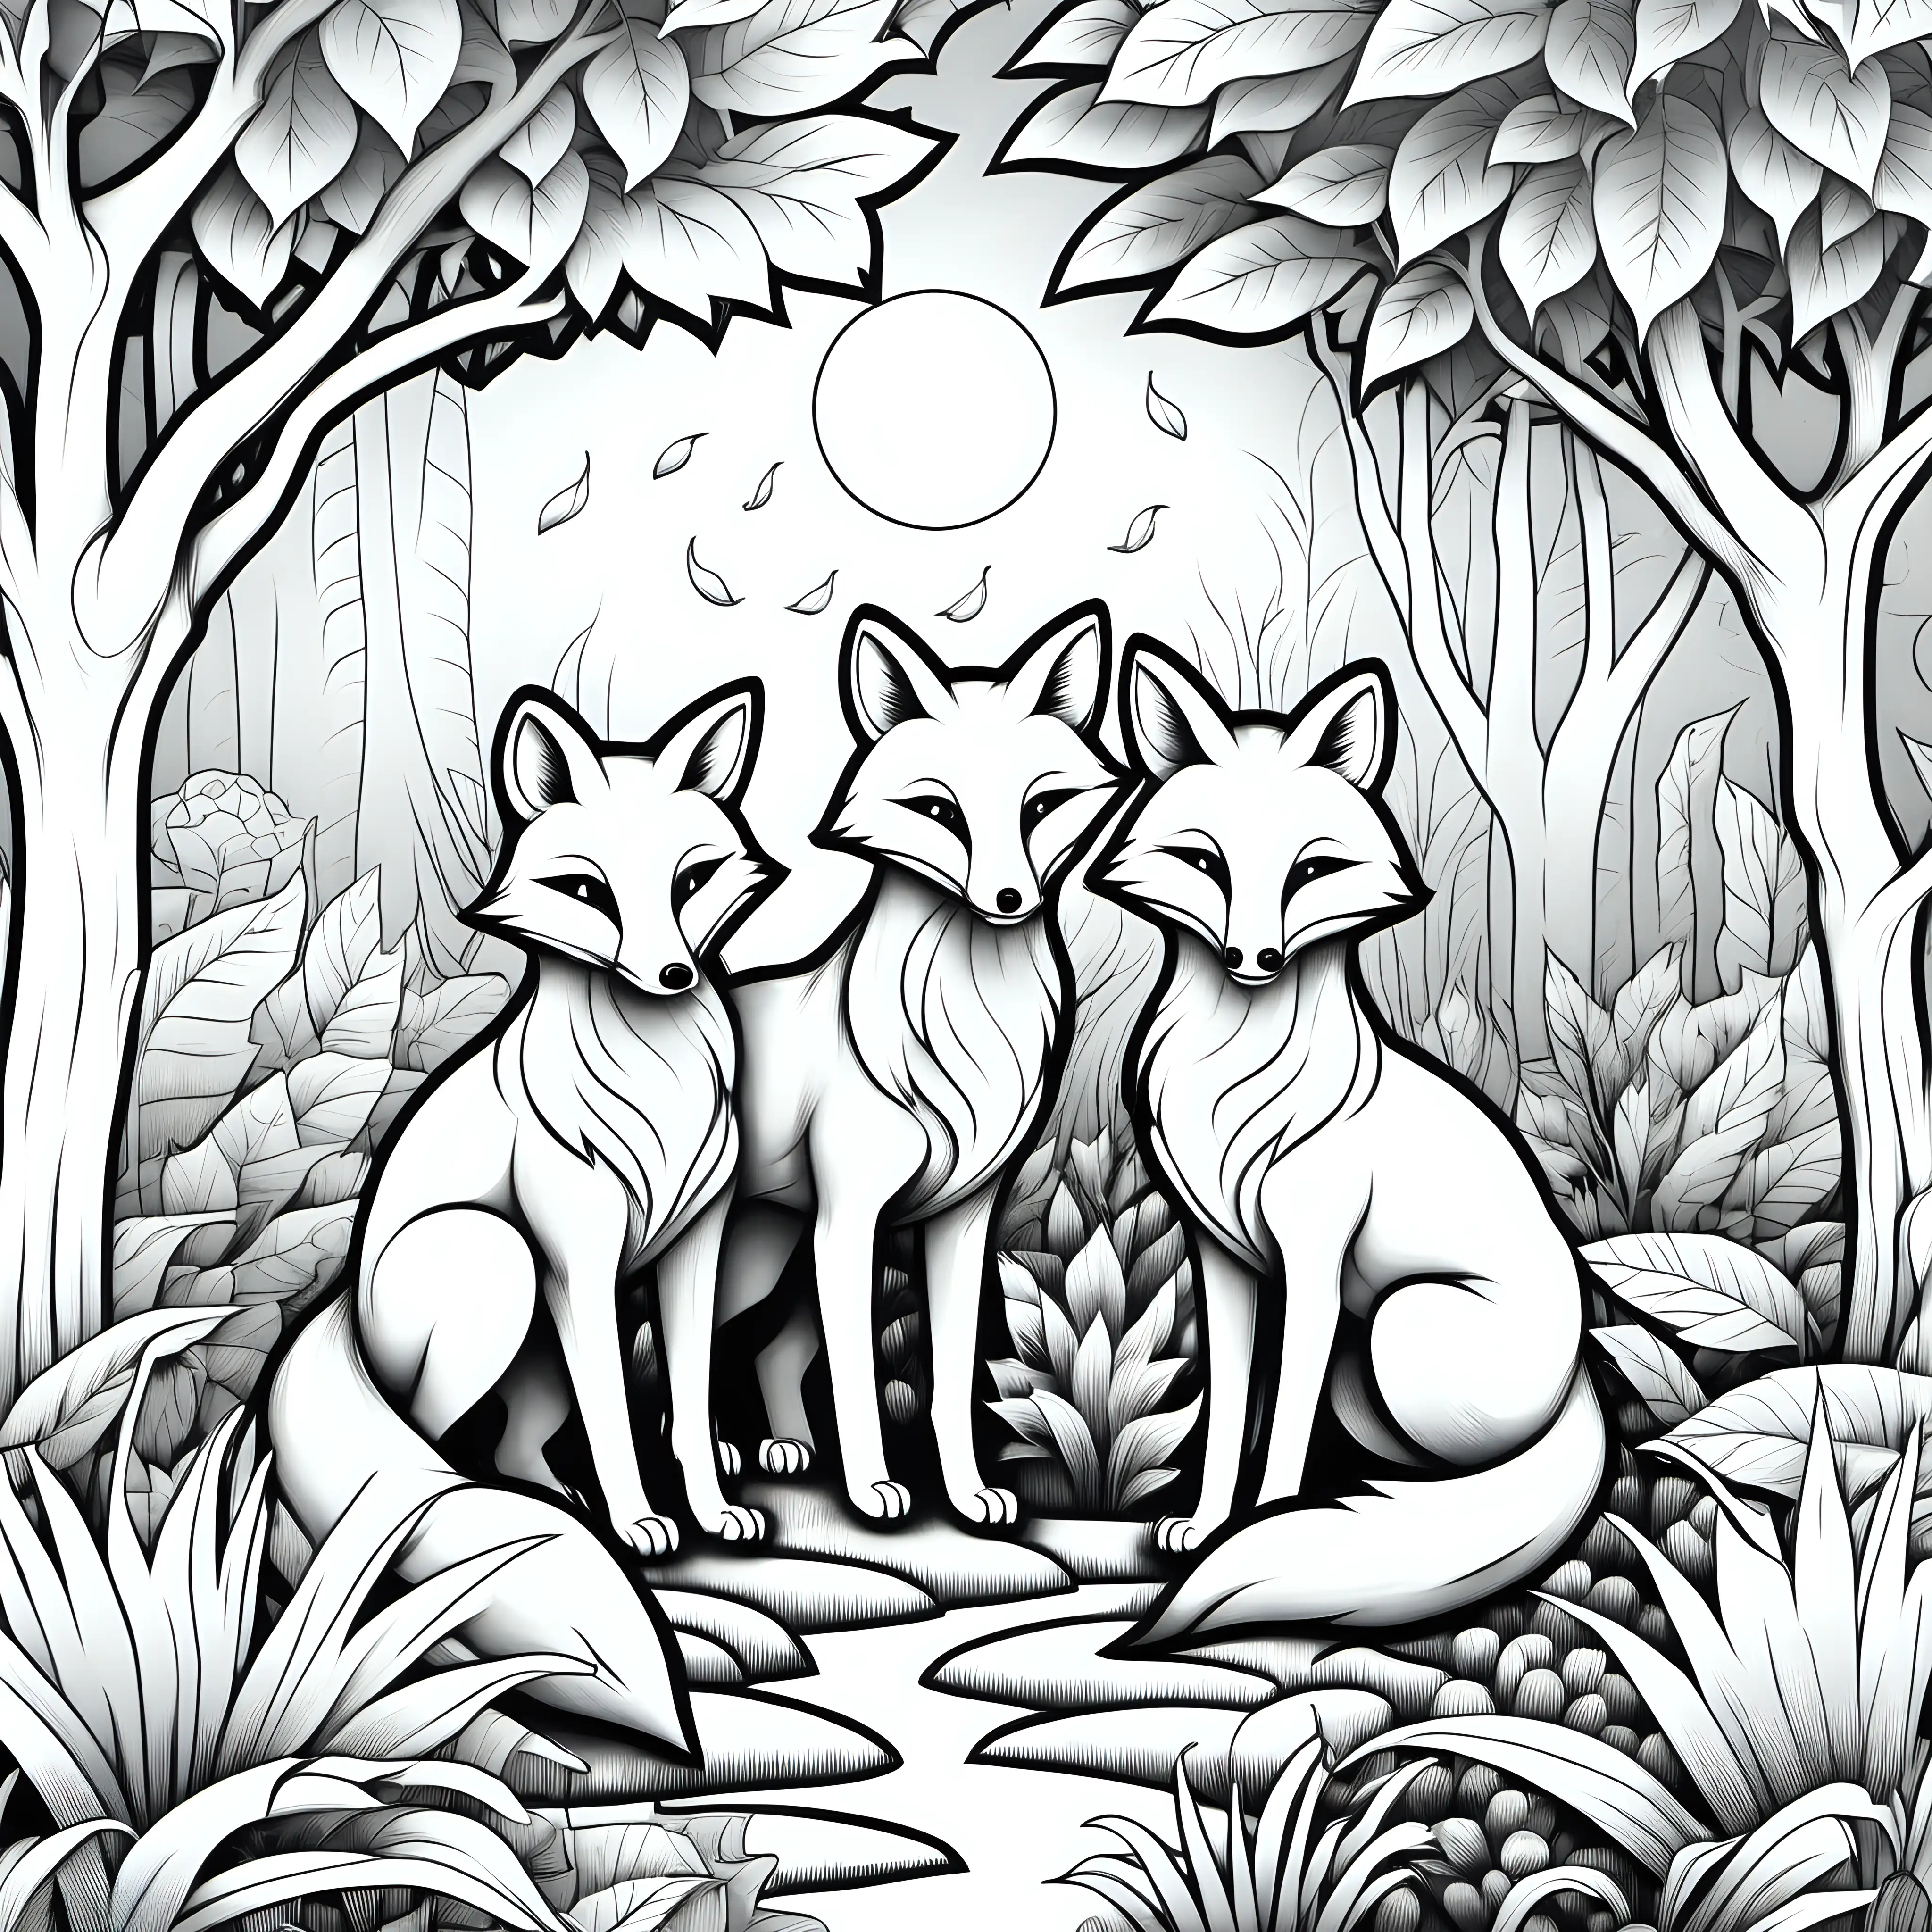 Coloring page for kids, Foxes in Garden of Eden, clean line art